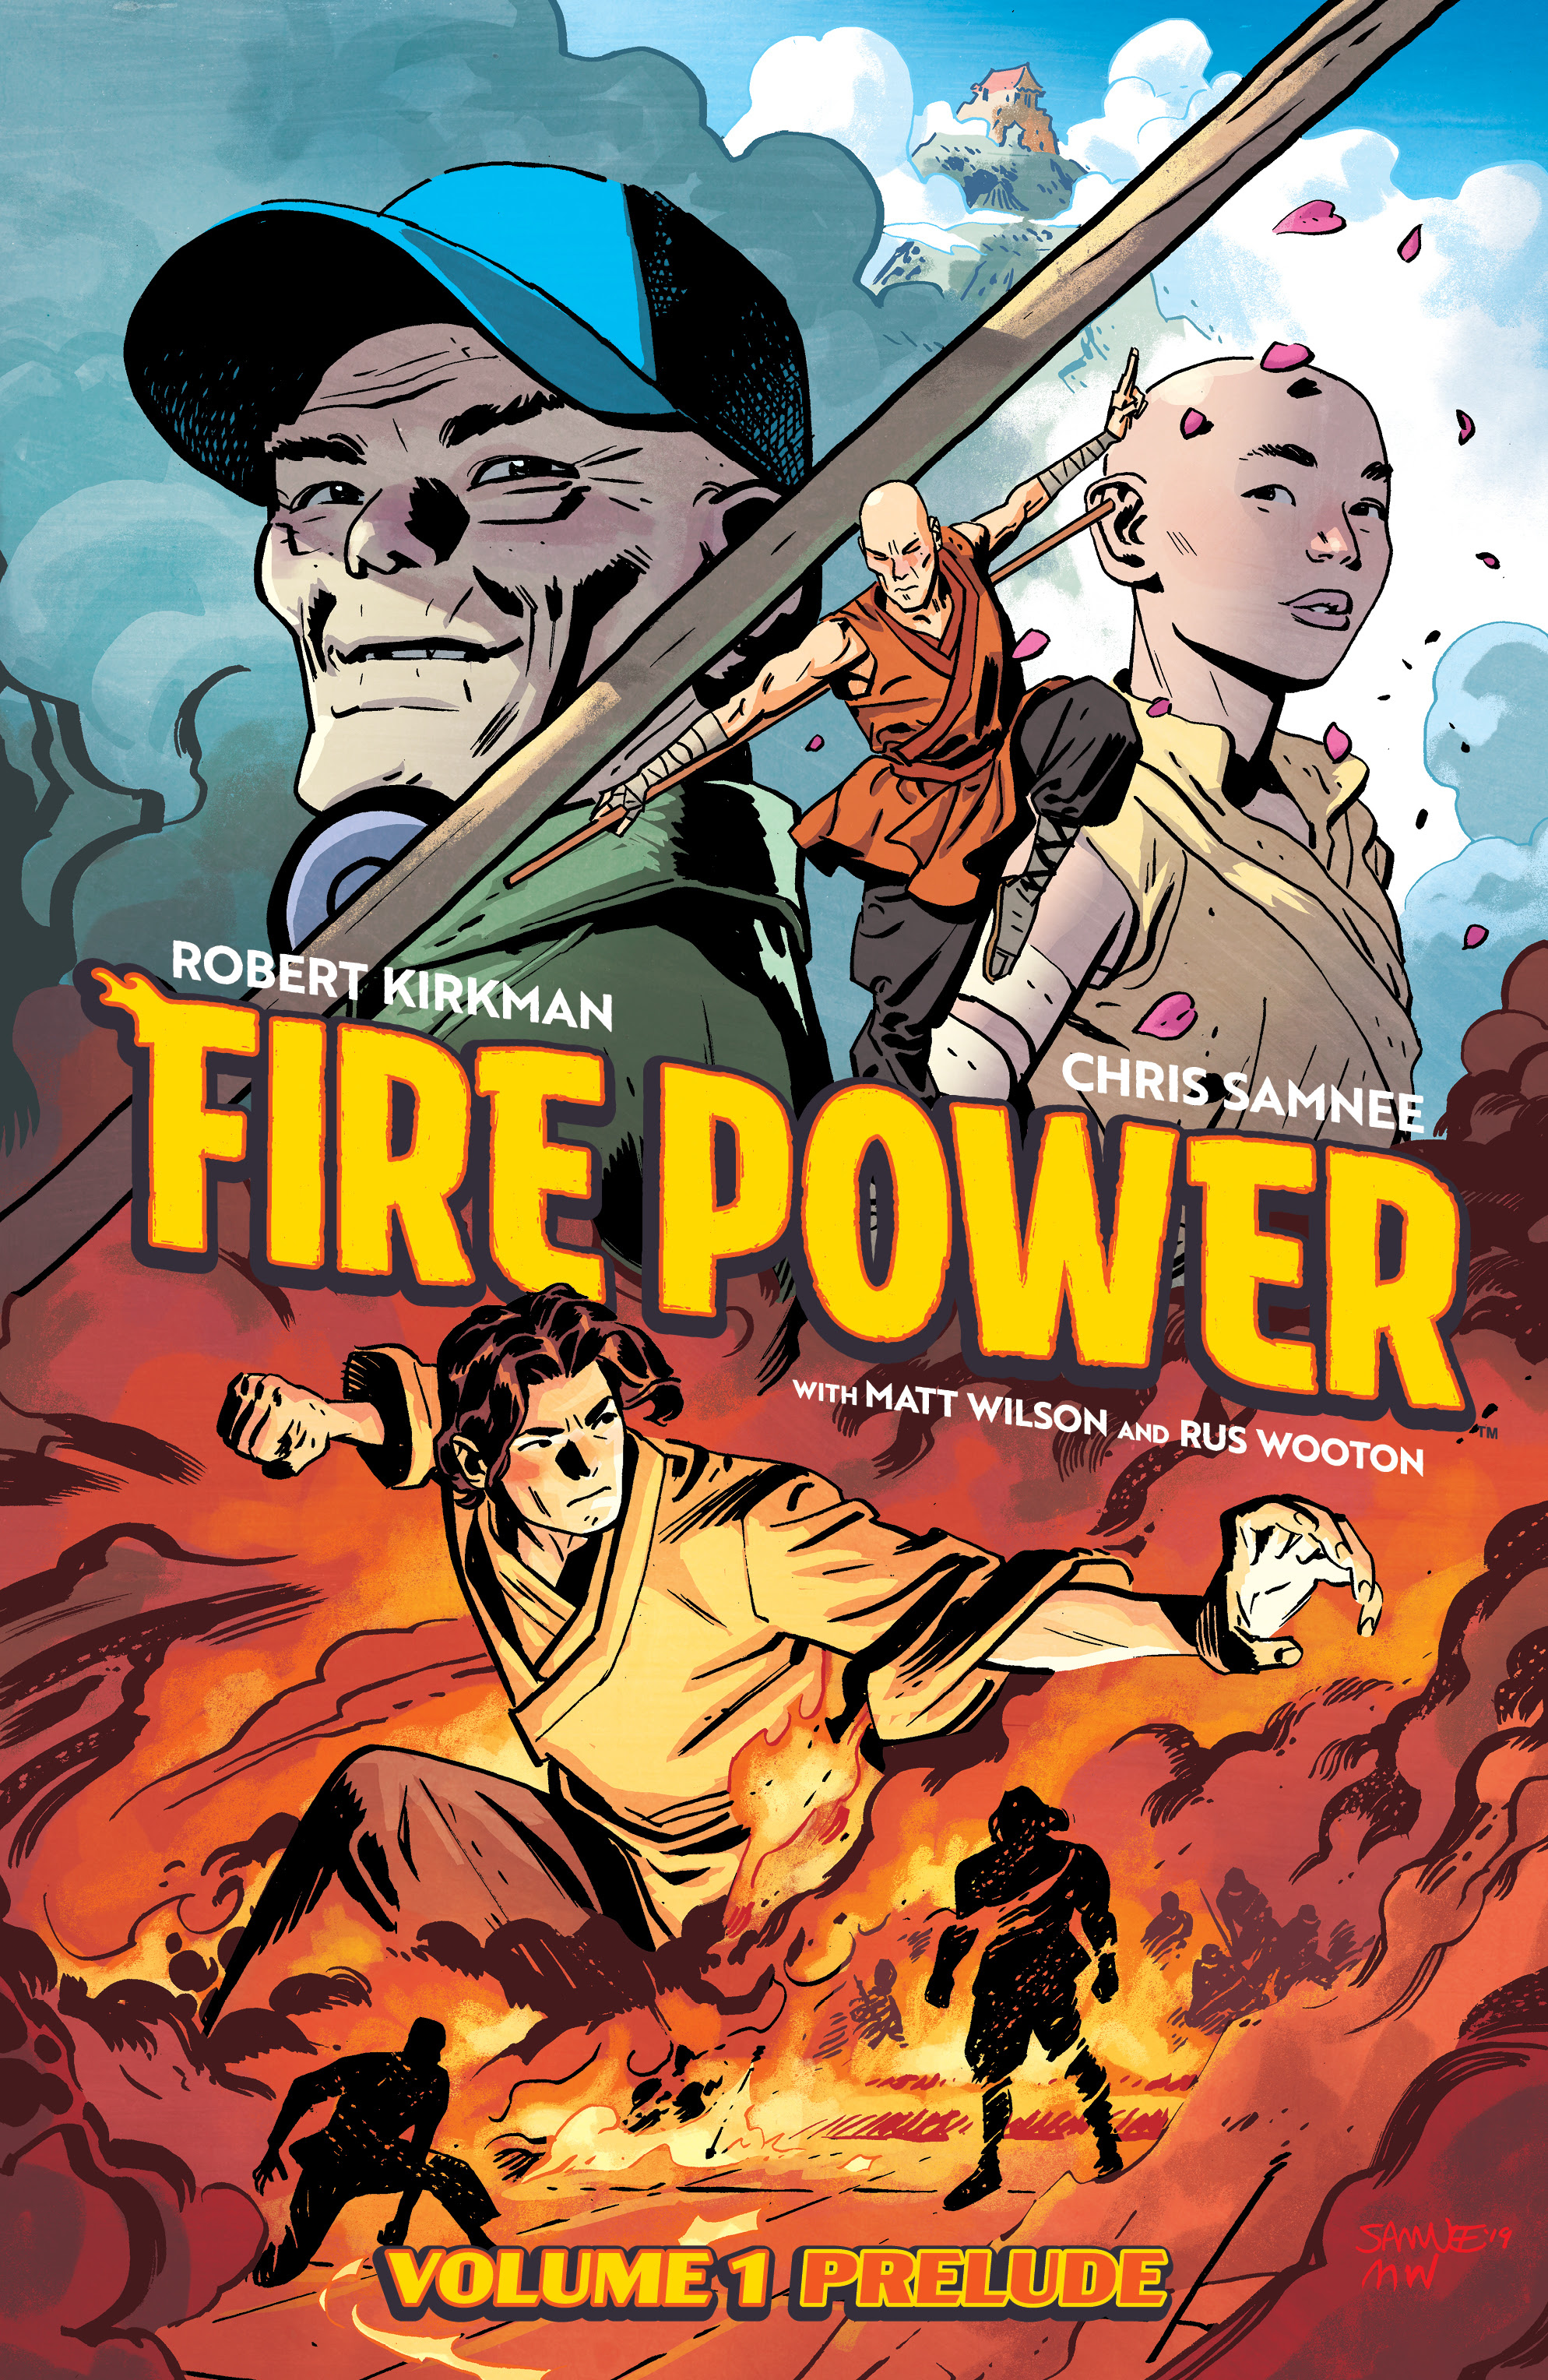 Image announces 'Fire Power' prelude graphic novel